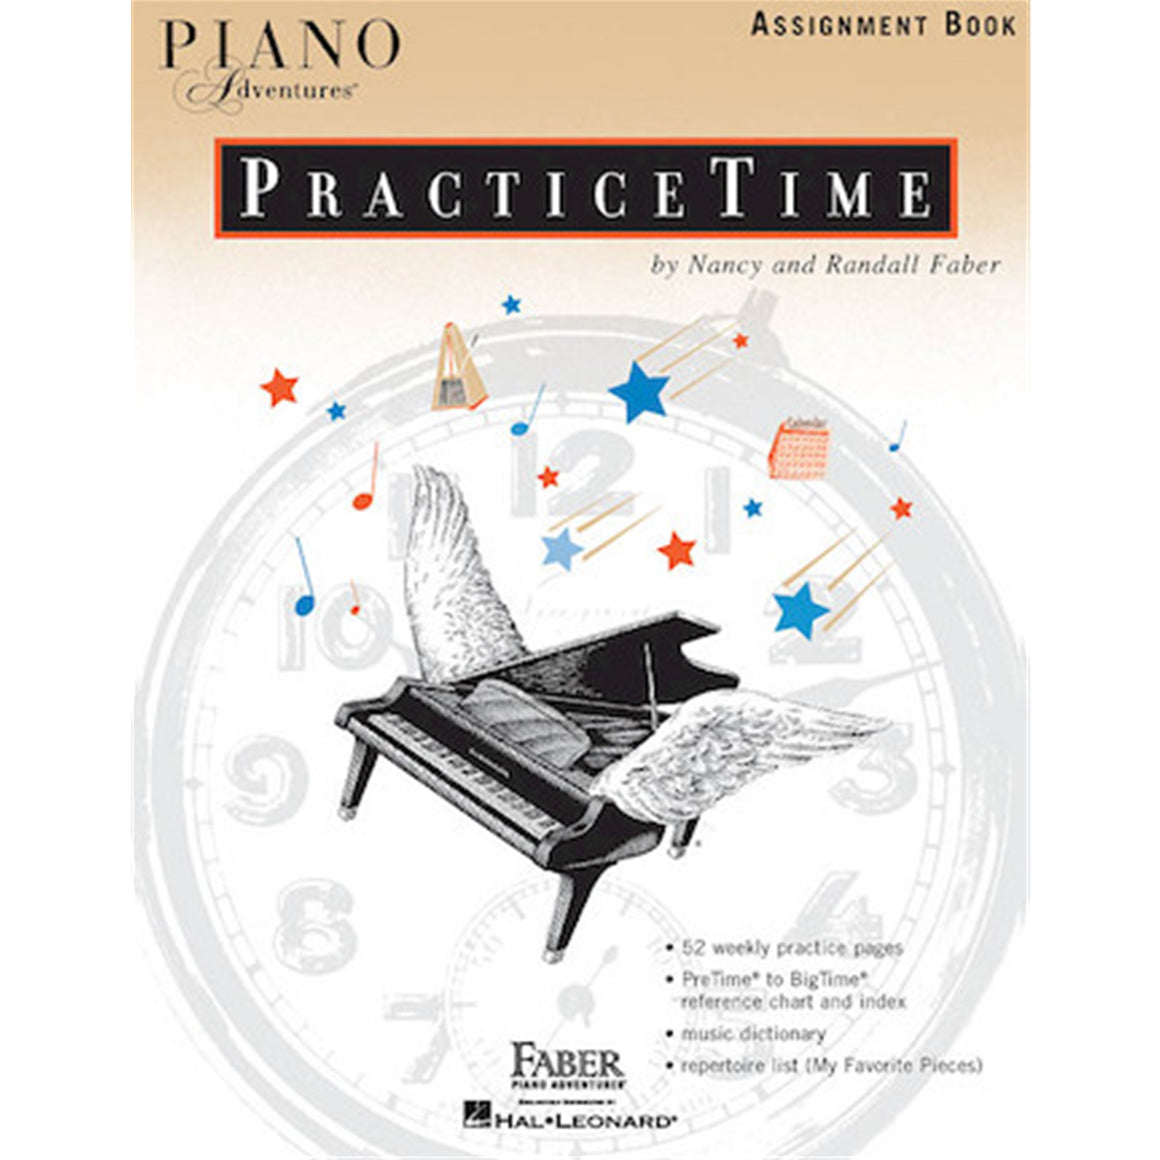 FJH PUBLISHER 420217 Piano Adventures PracticeTime Assignment Book